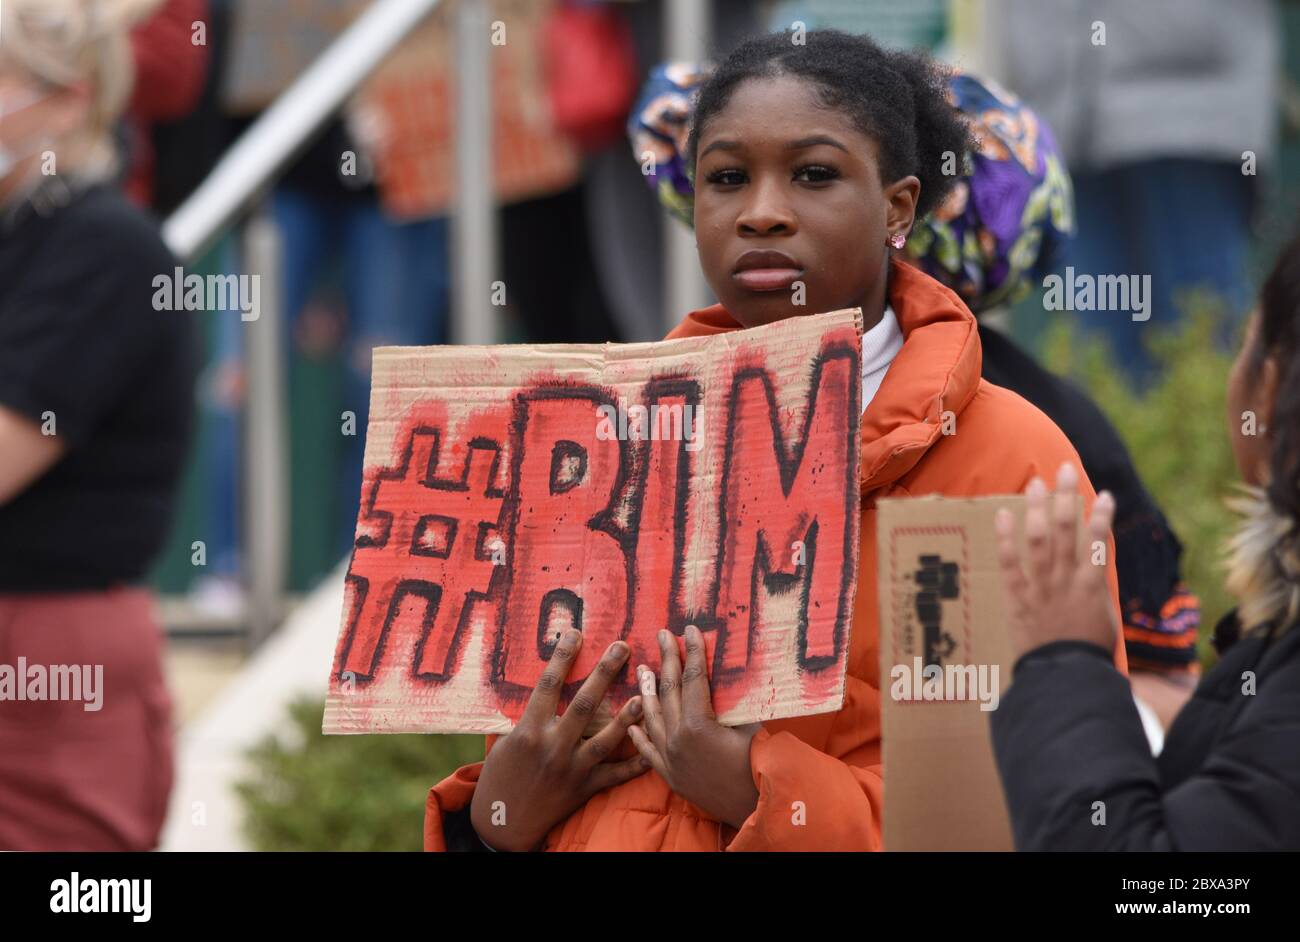 A young black British woman protesting at an anti-racism Black Lives Matter rally in the UK following the unlawful killing of George Floyd in the US Stock Photo